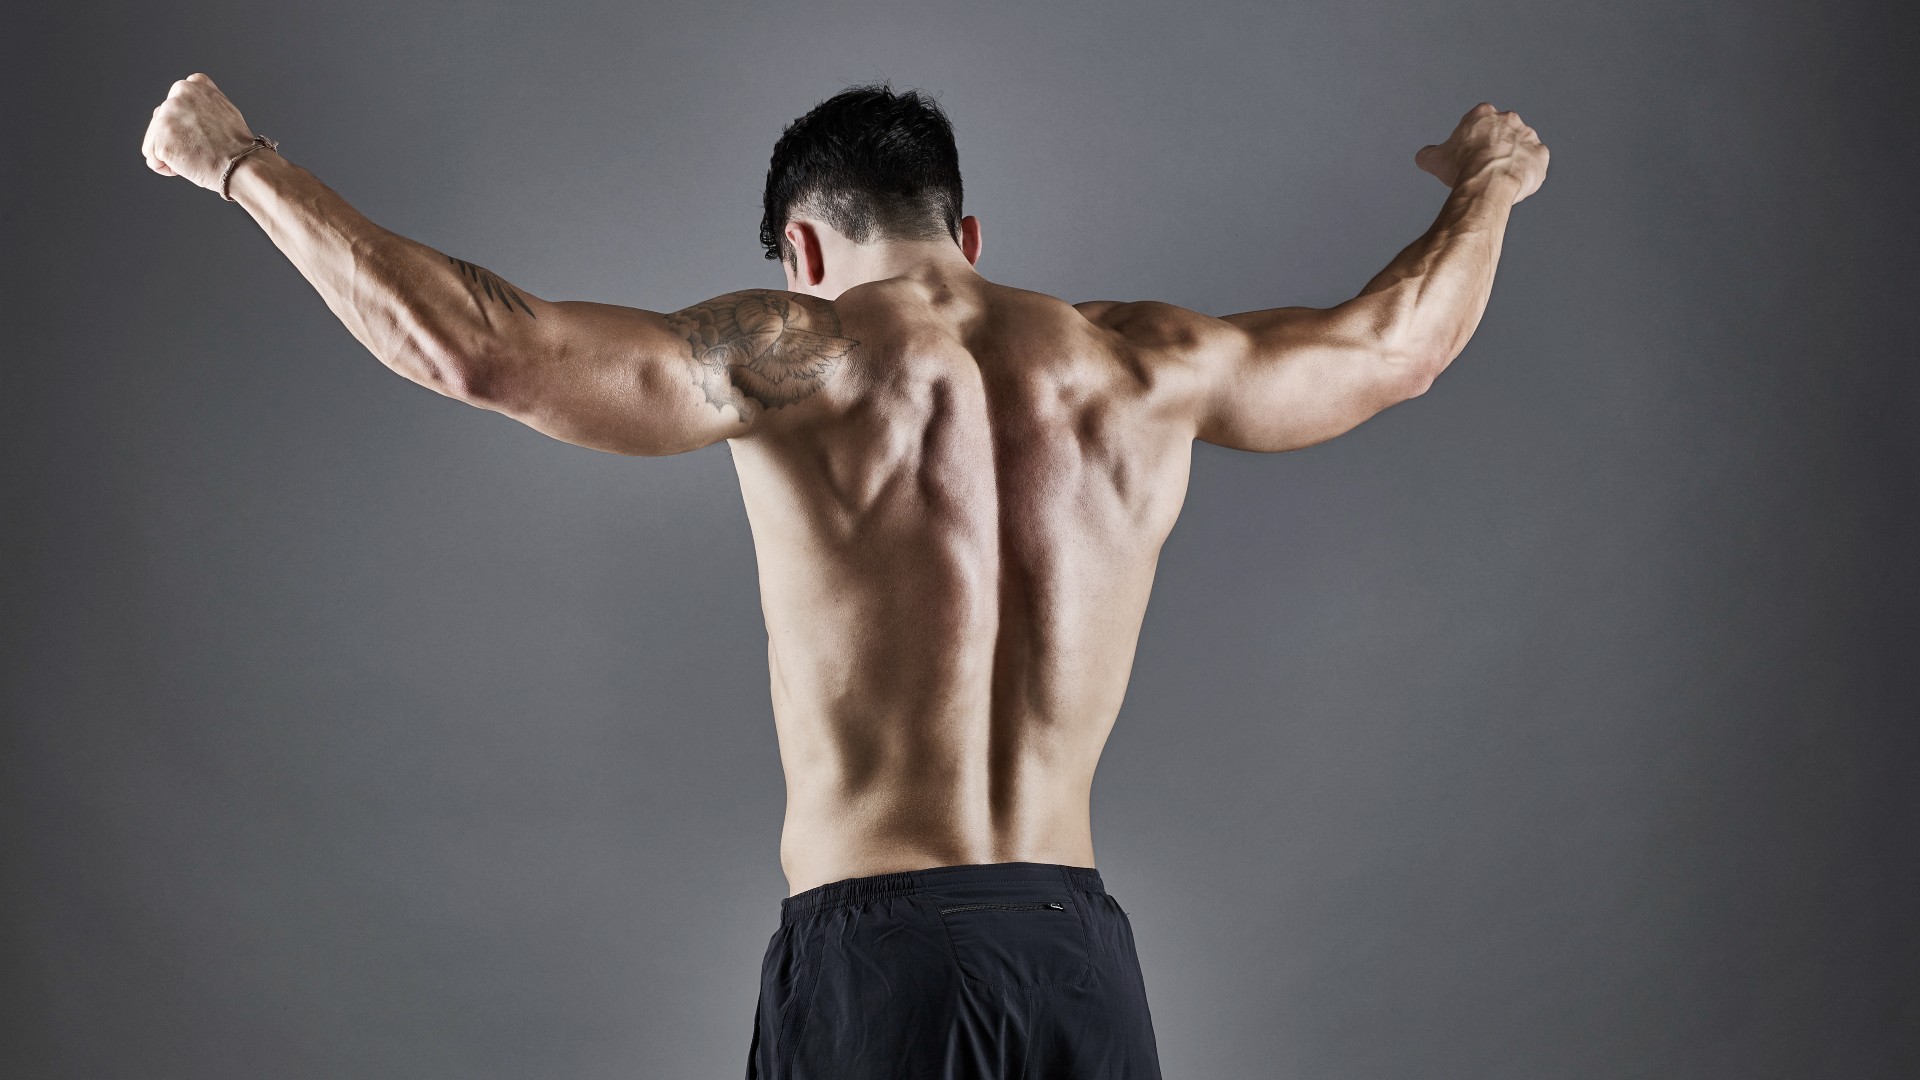 I'm a personal trainer — here are 3 best compound exercises for